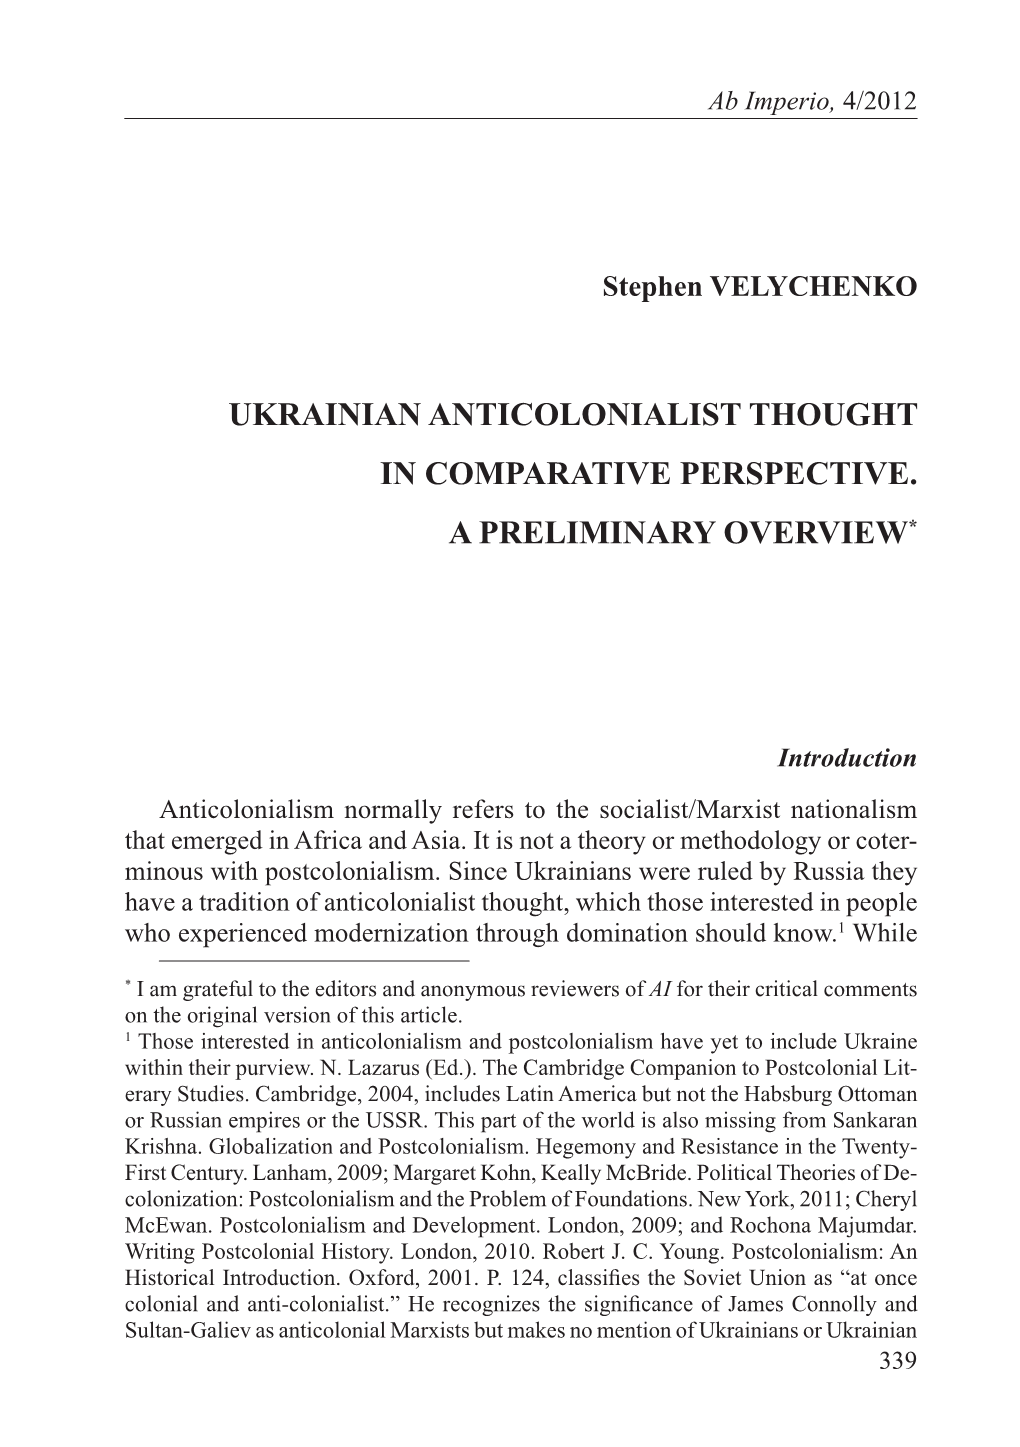 Ukrainian Anticolonialist Thought in Comparative Perspective. a Preliminary Overview*